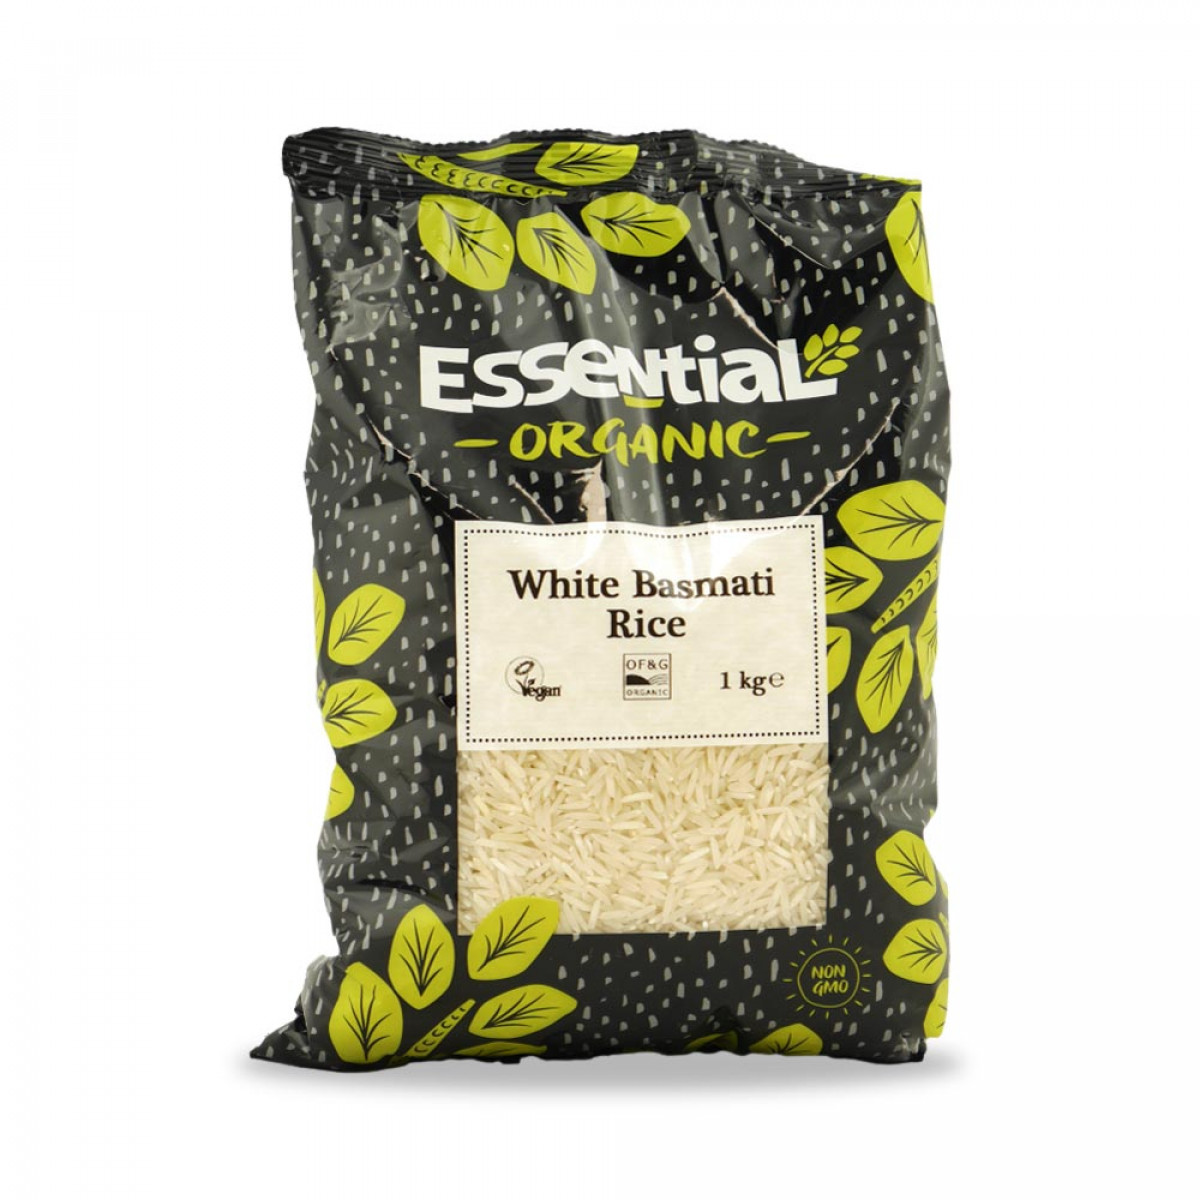 Product picture for Basmati White